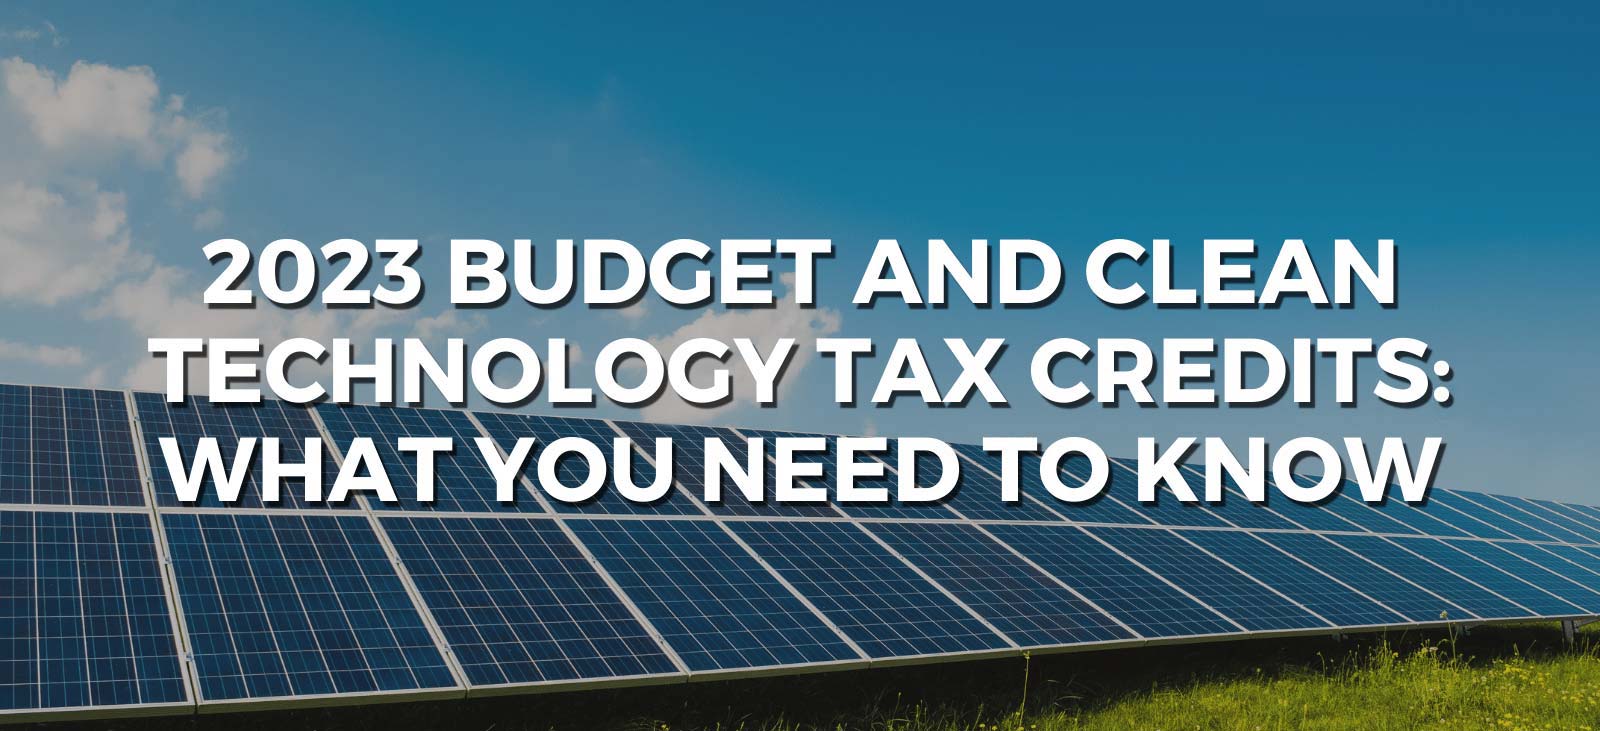 2023 budget and clean technology tax credits what you need to know